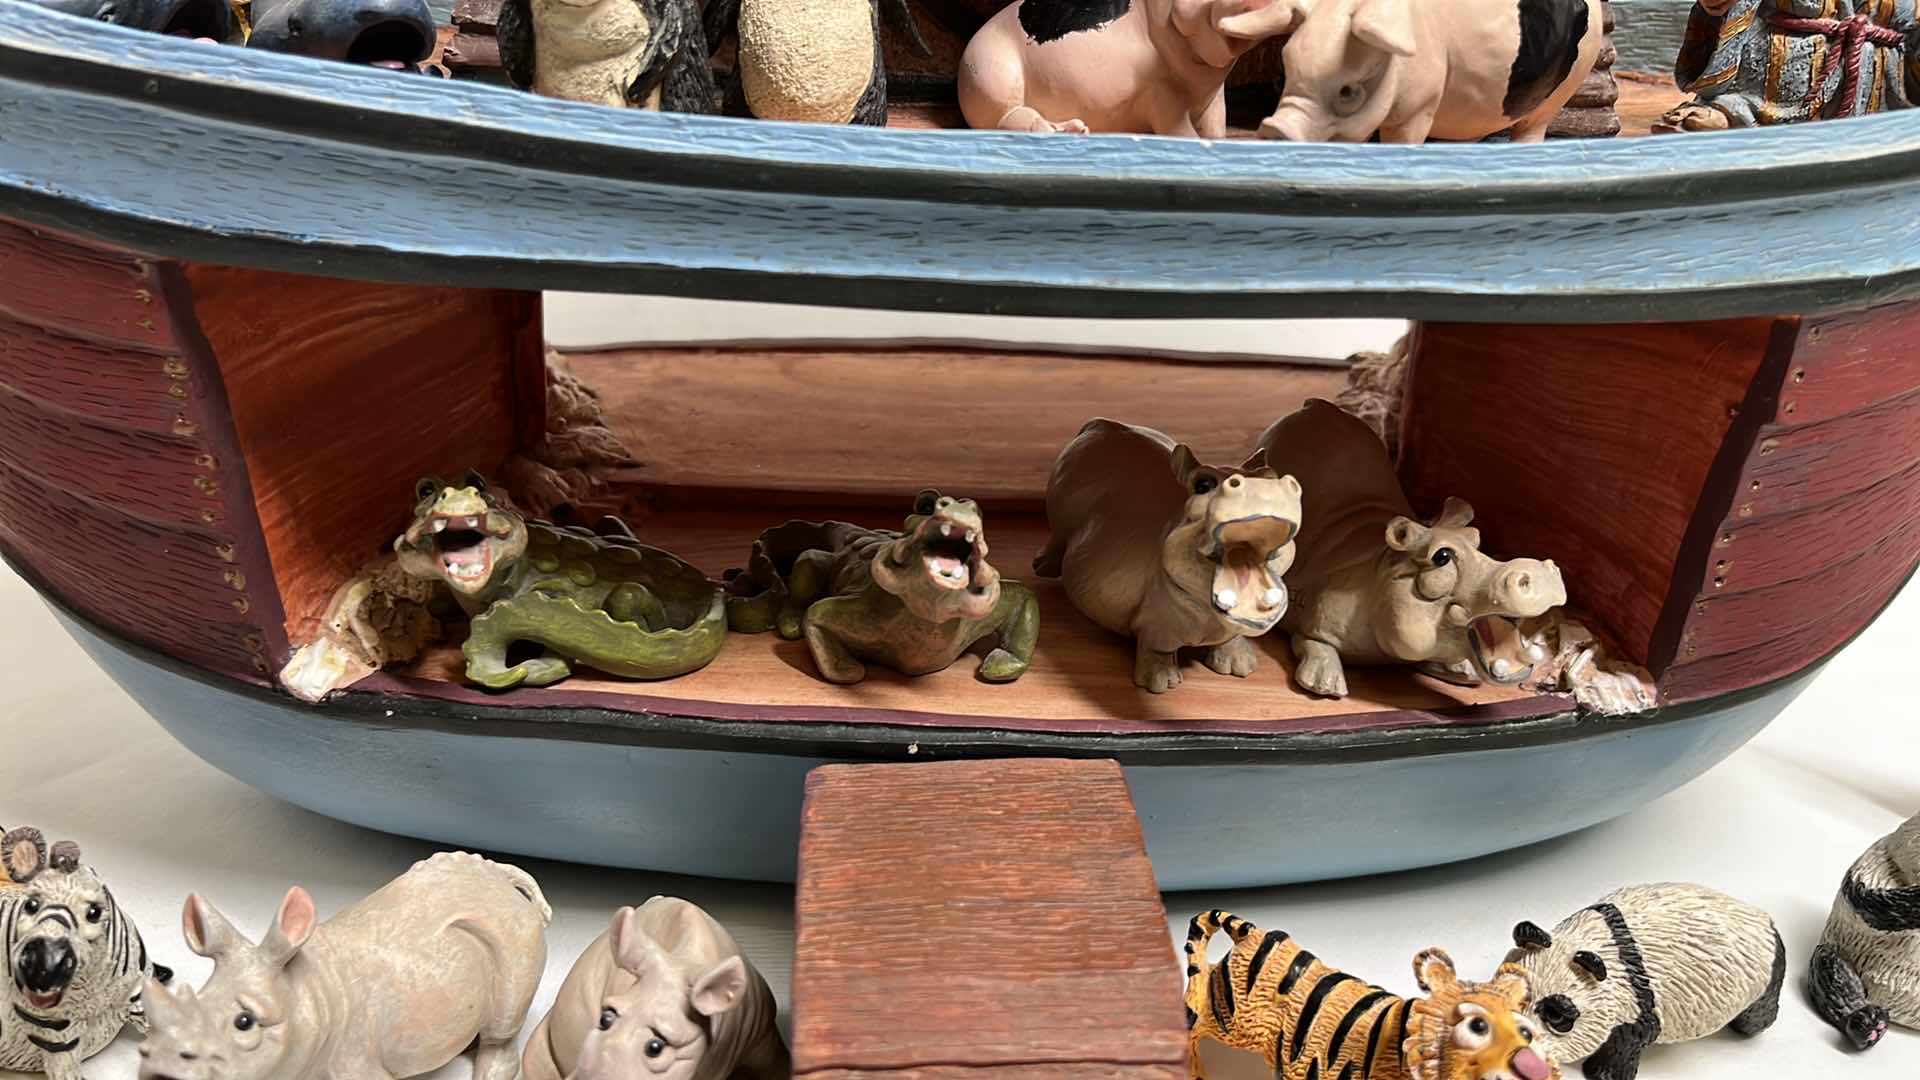 Photo 3 of NOAH’S ARK S.S. HOLY HERD COLLECTIBLES W NOAH & HIS WIFE & 34 ANIMAL FIGURINES 8.25” X 18.5” H12.5”